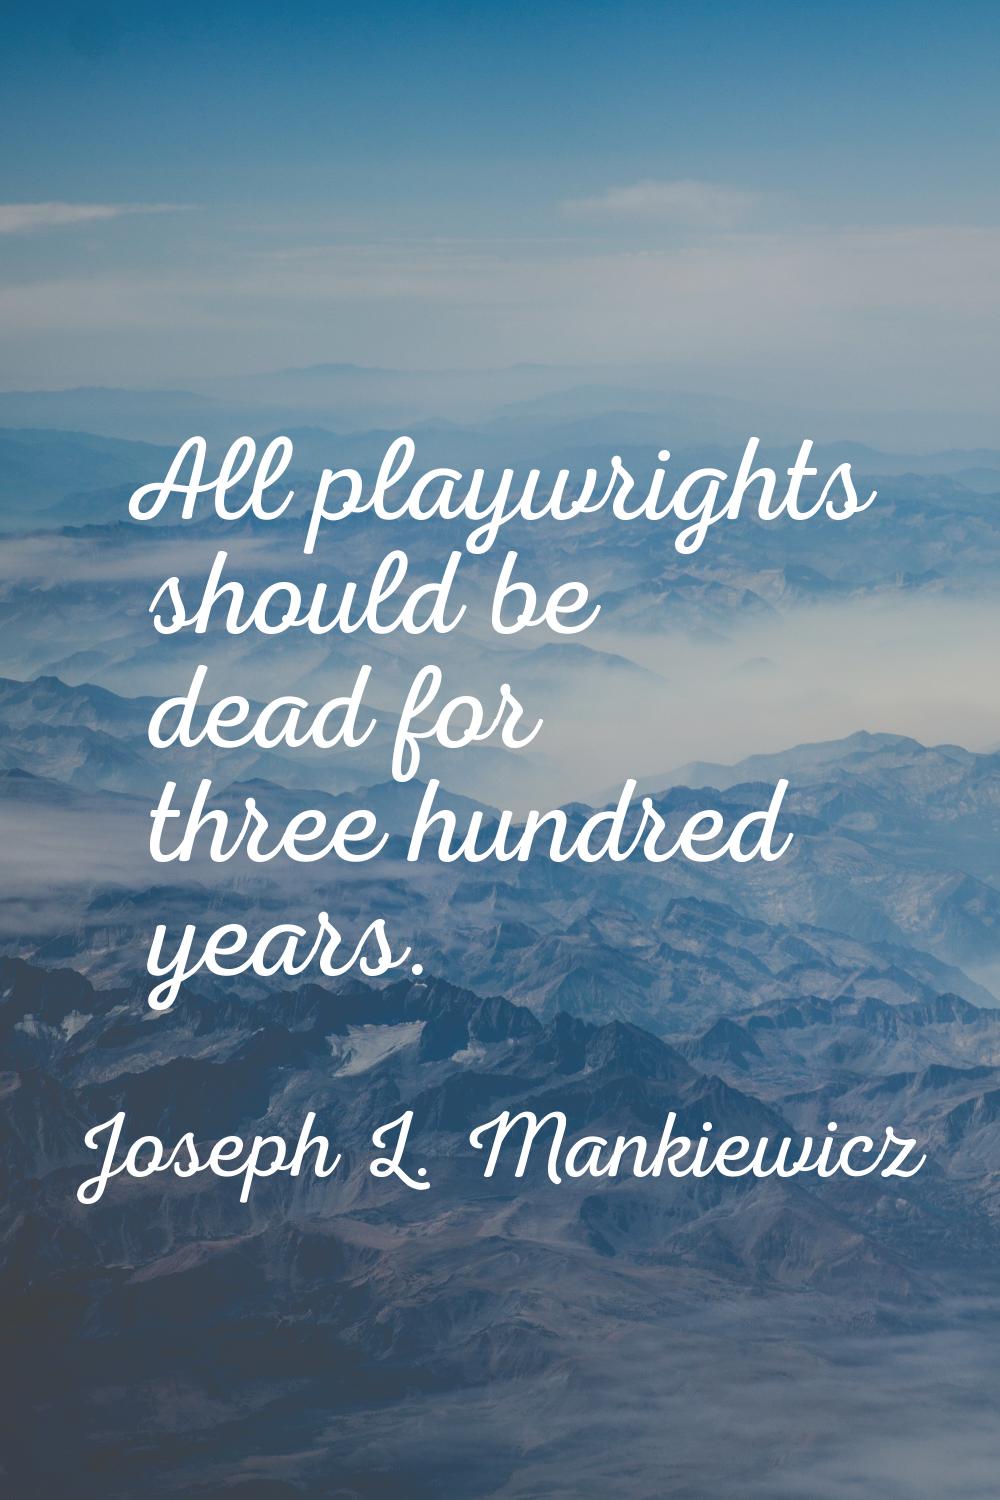 All playwrights should be dead for three hundred years.